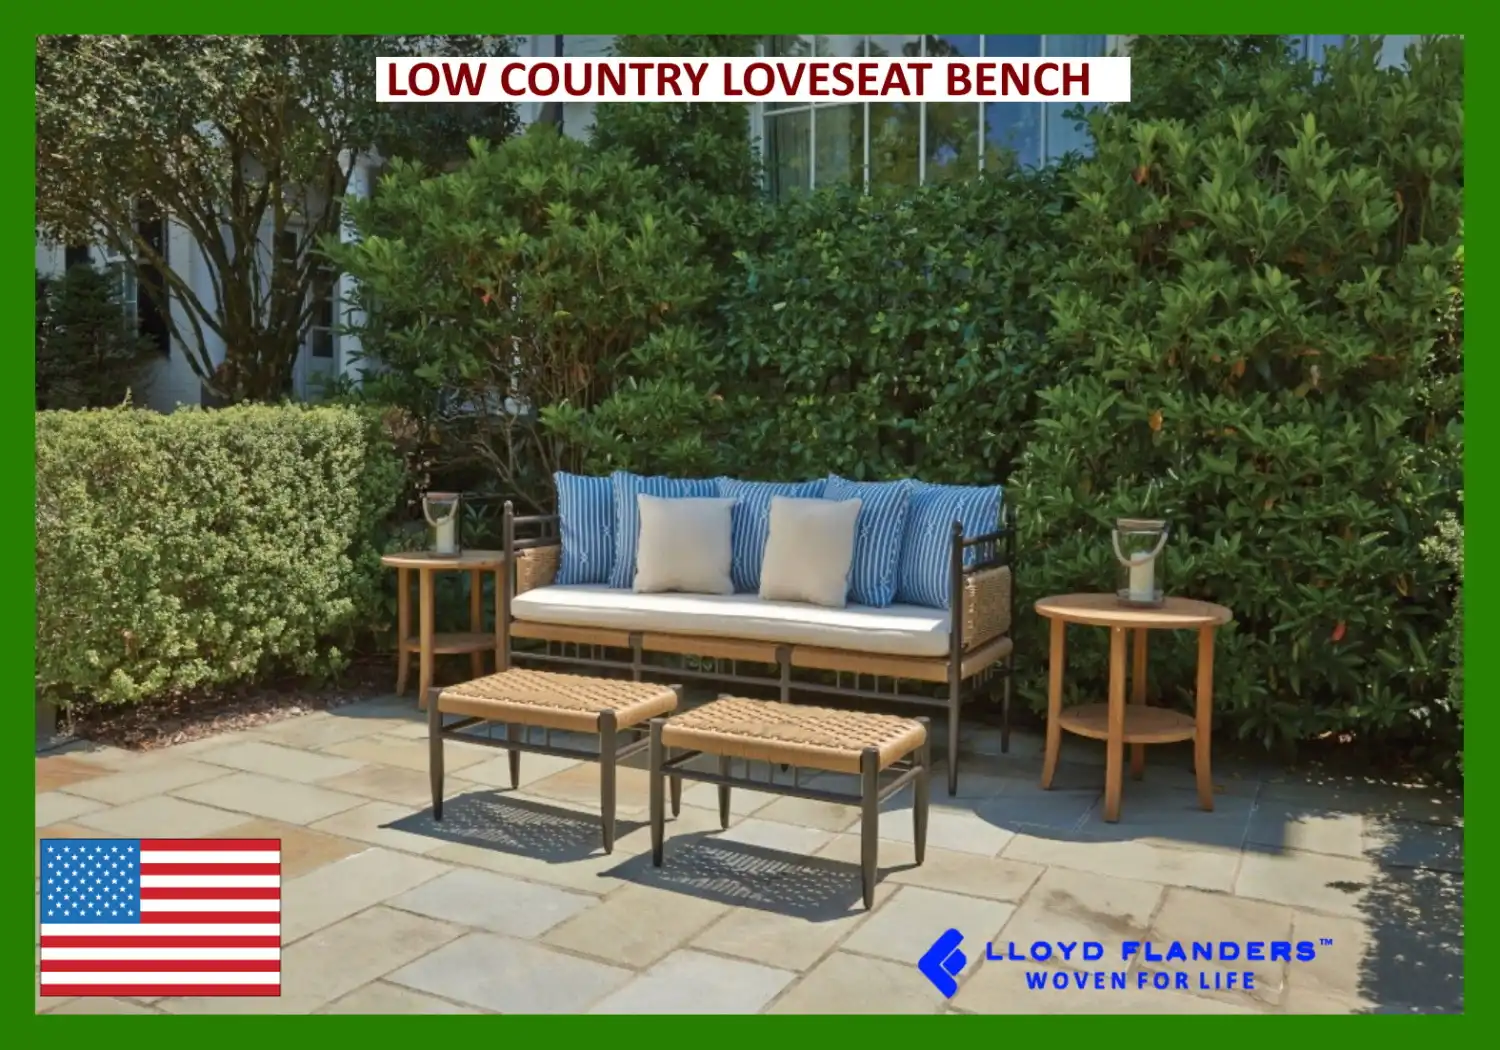 LOW COUNTRY LOVESEAT BENCH